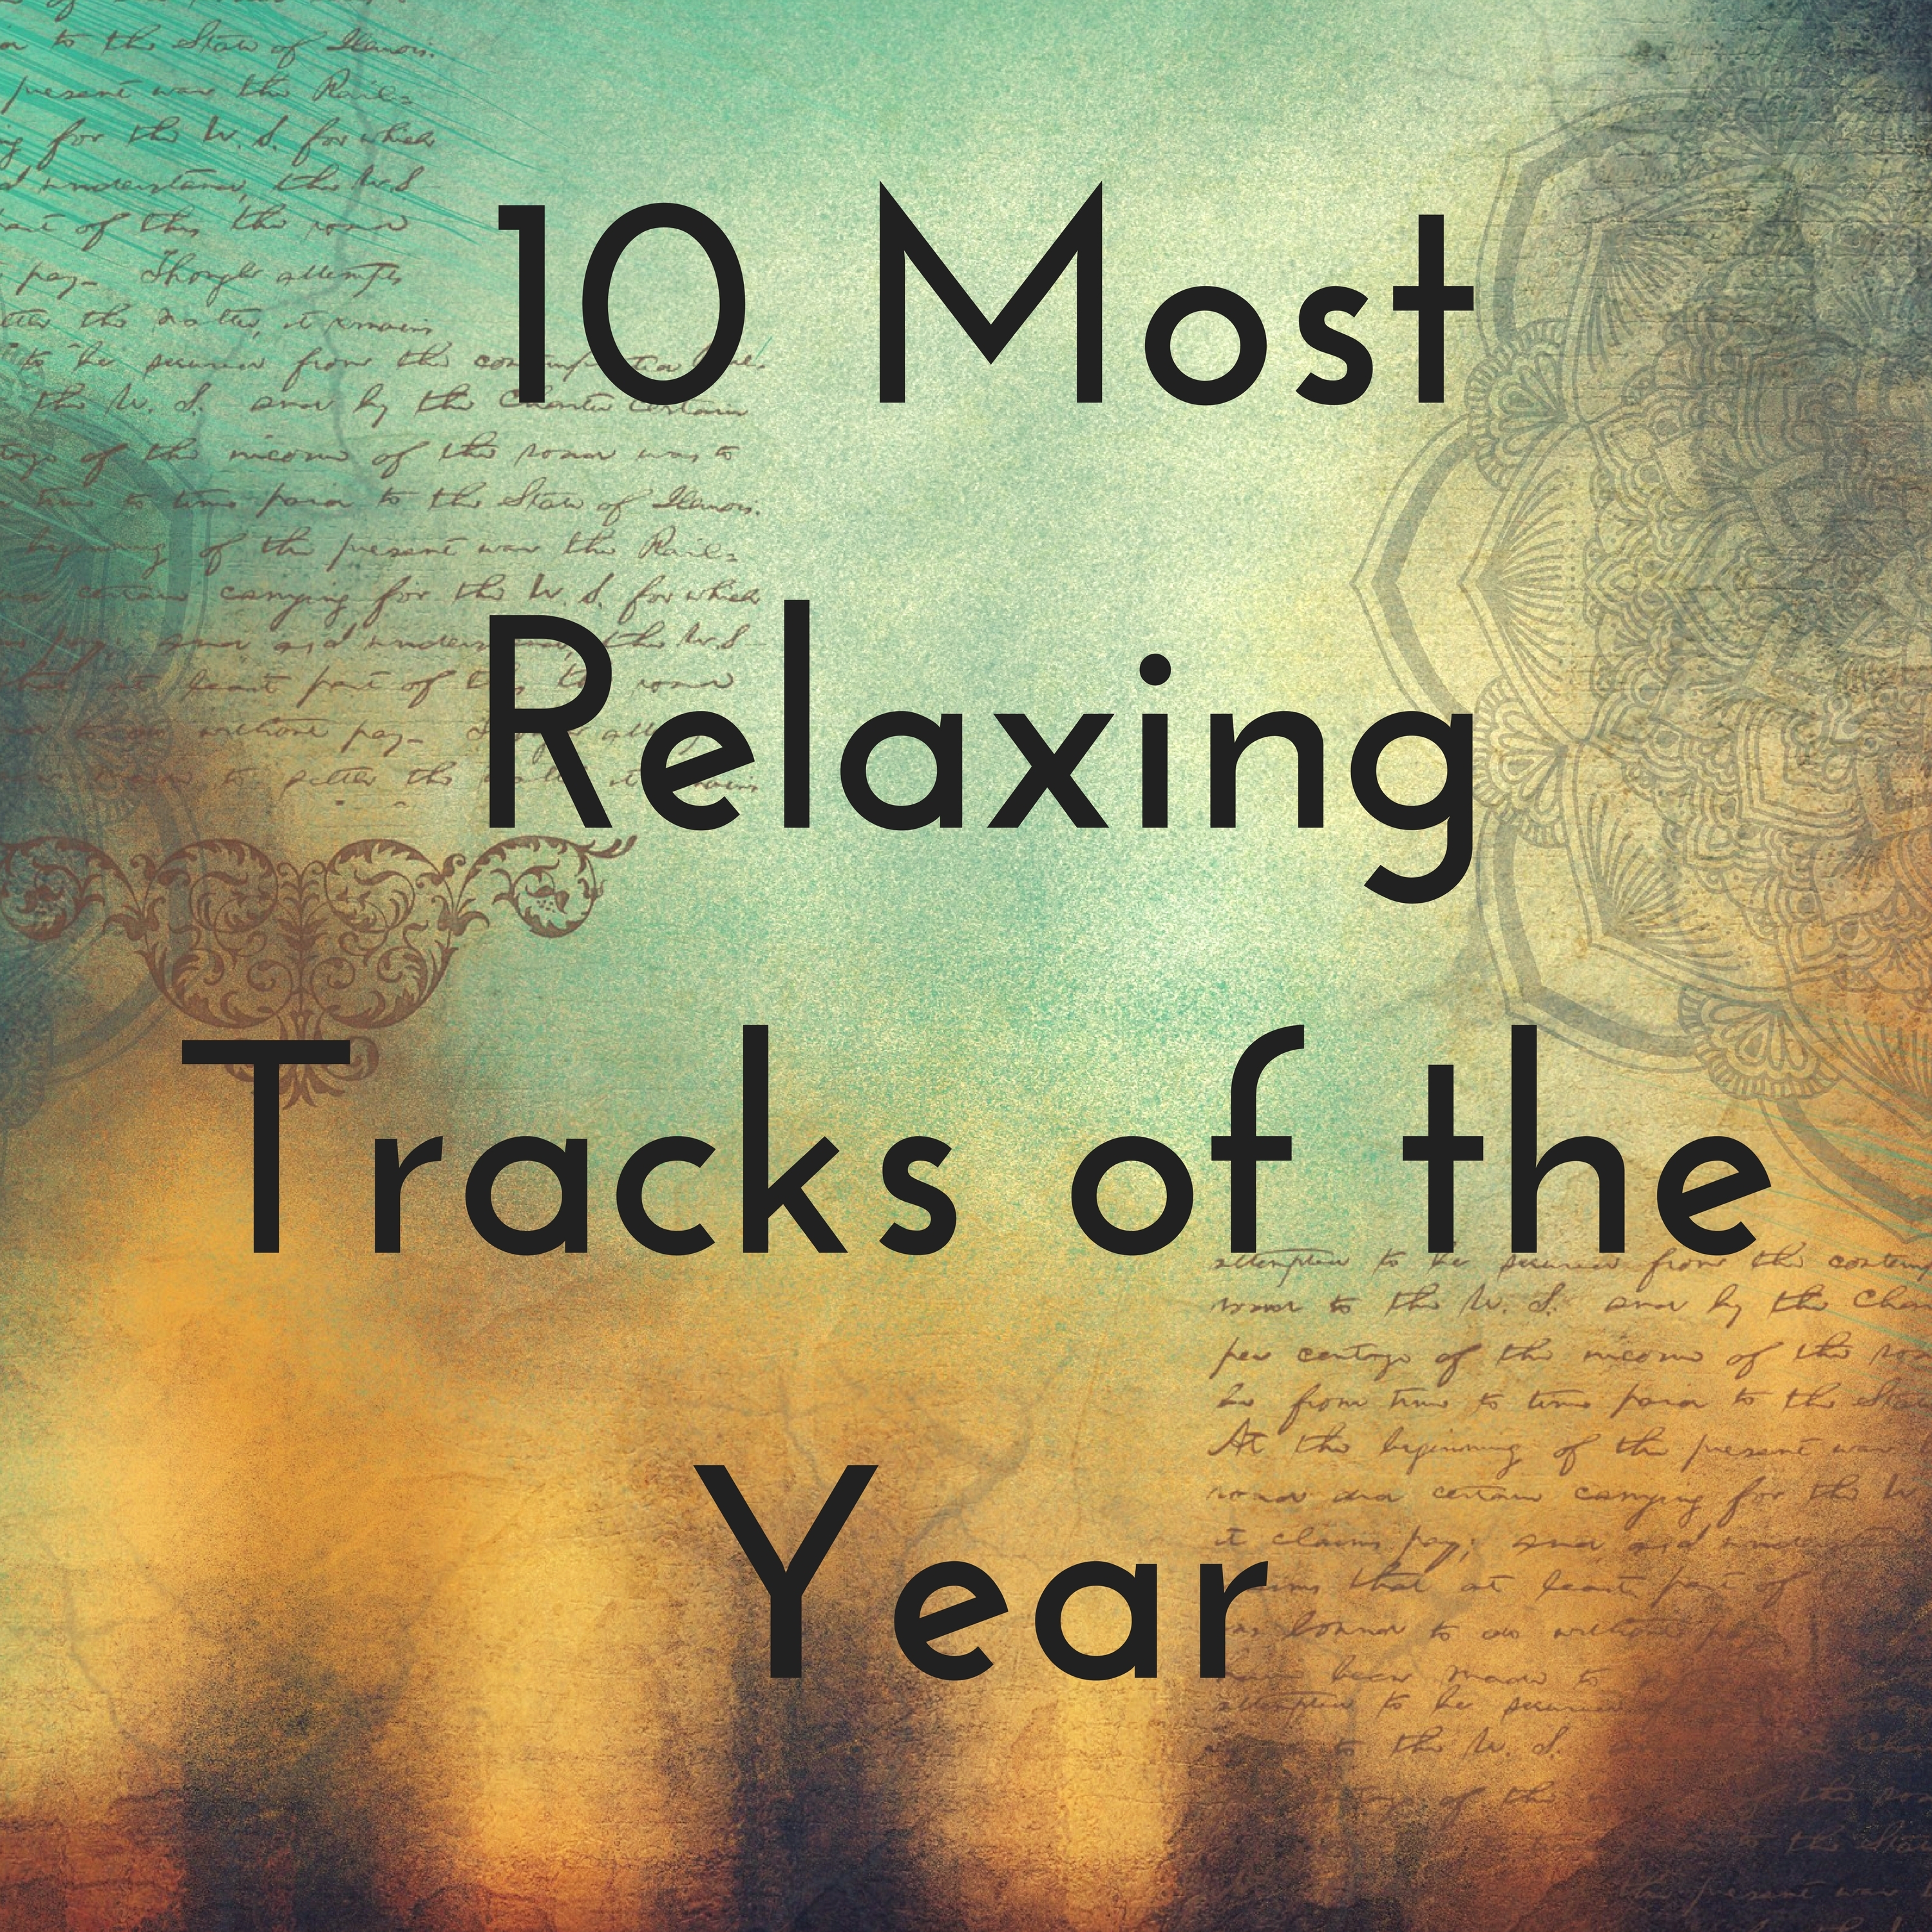 10 Most Relaxing Tracks of the Year - Fall Asleep Deeply Through the Night, Sleeping Songs